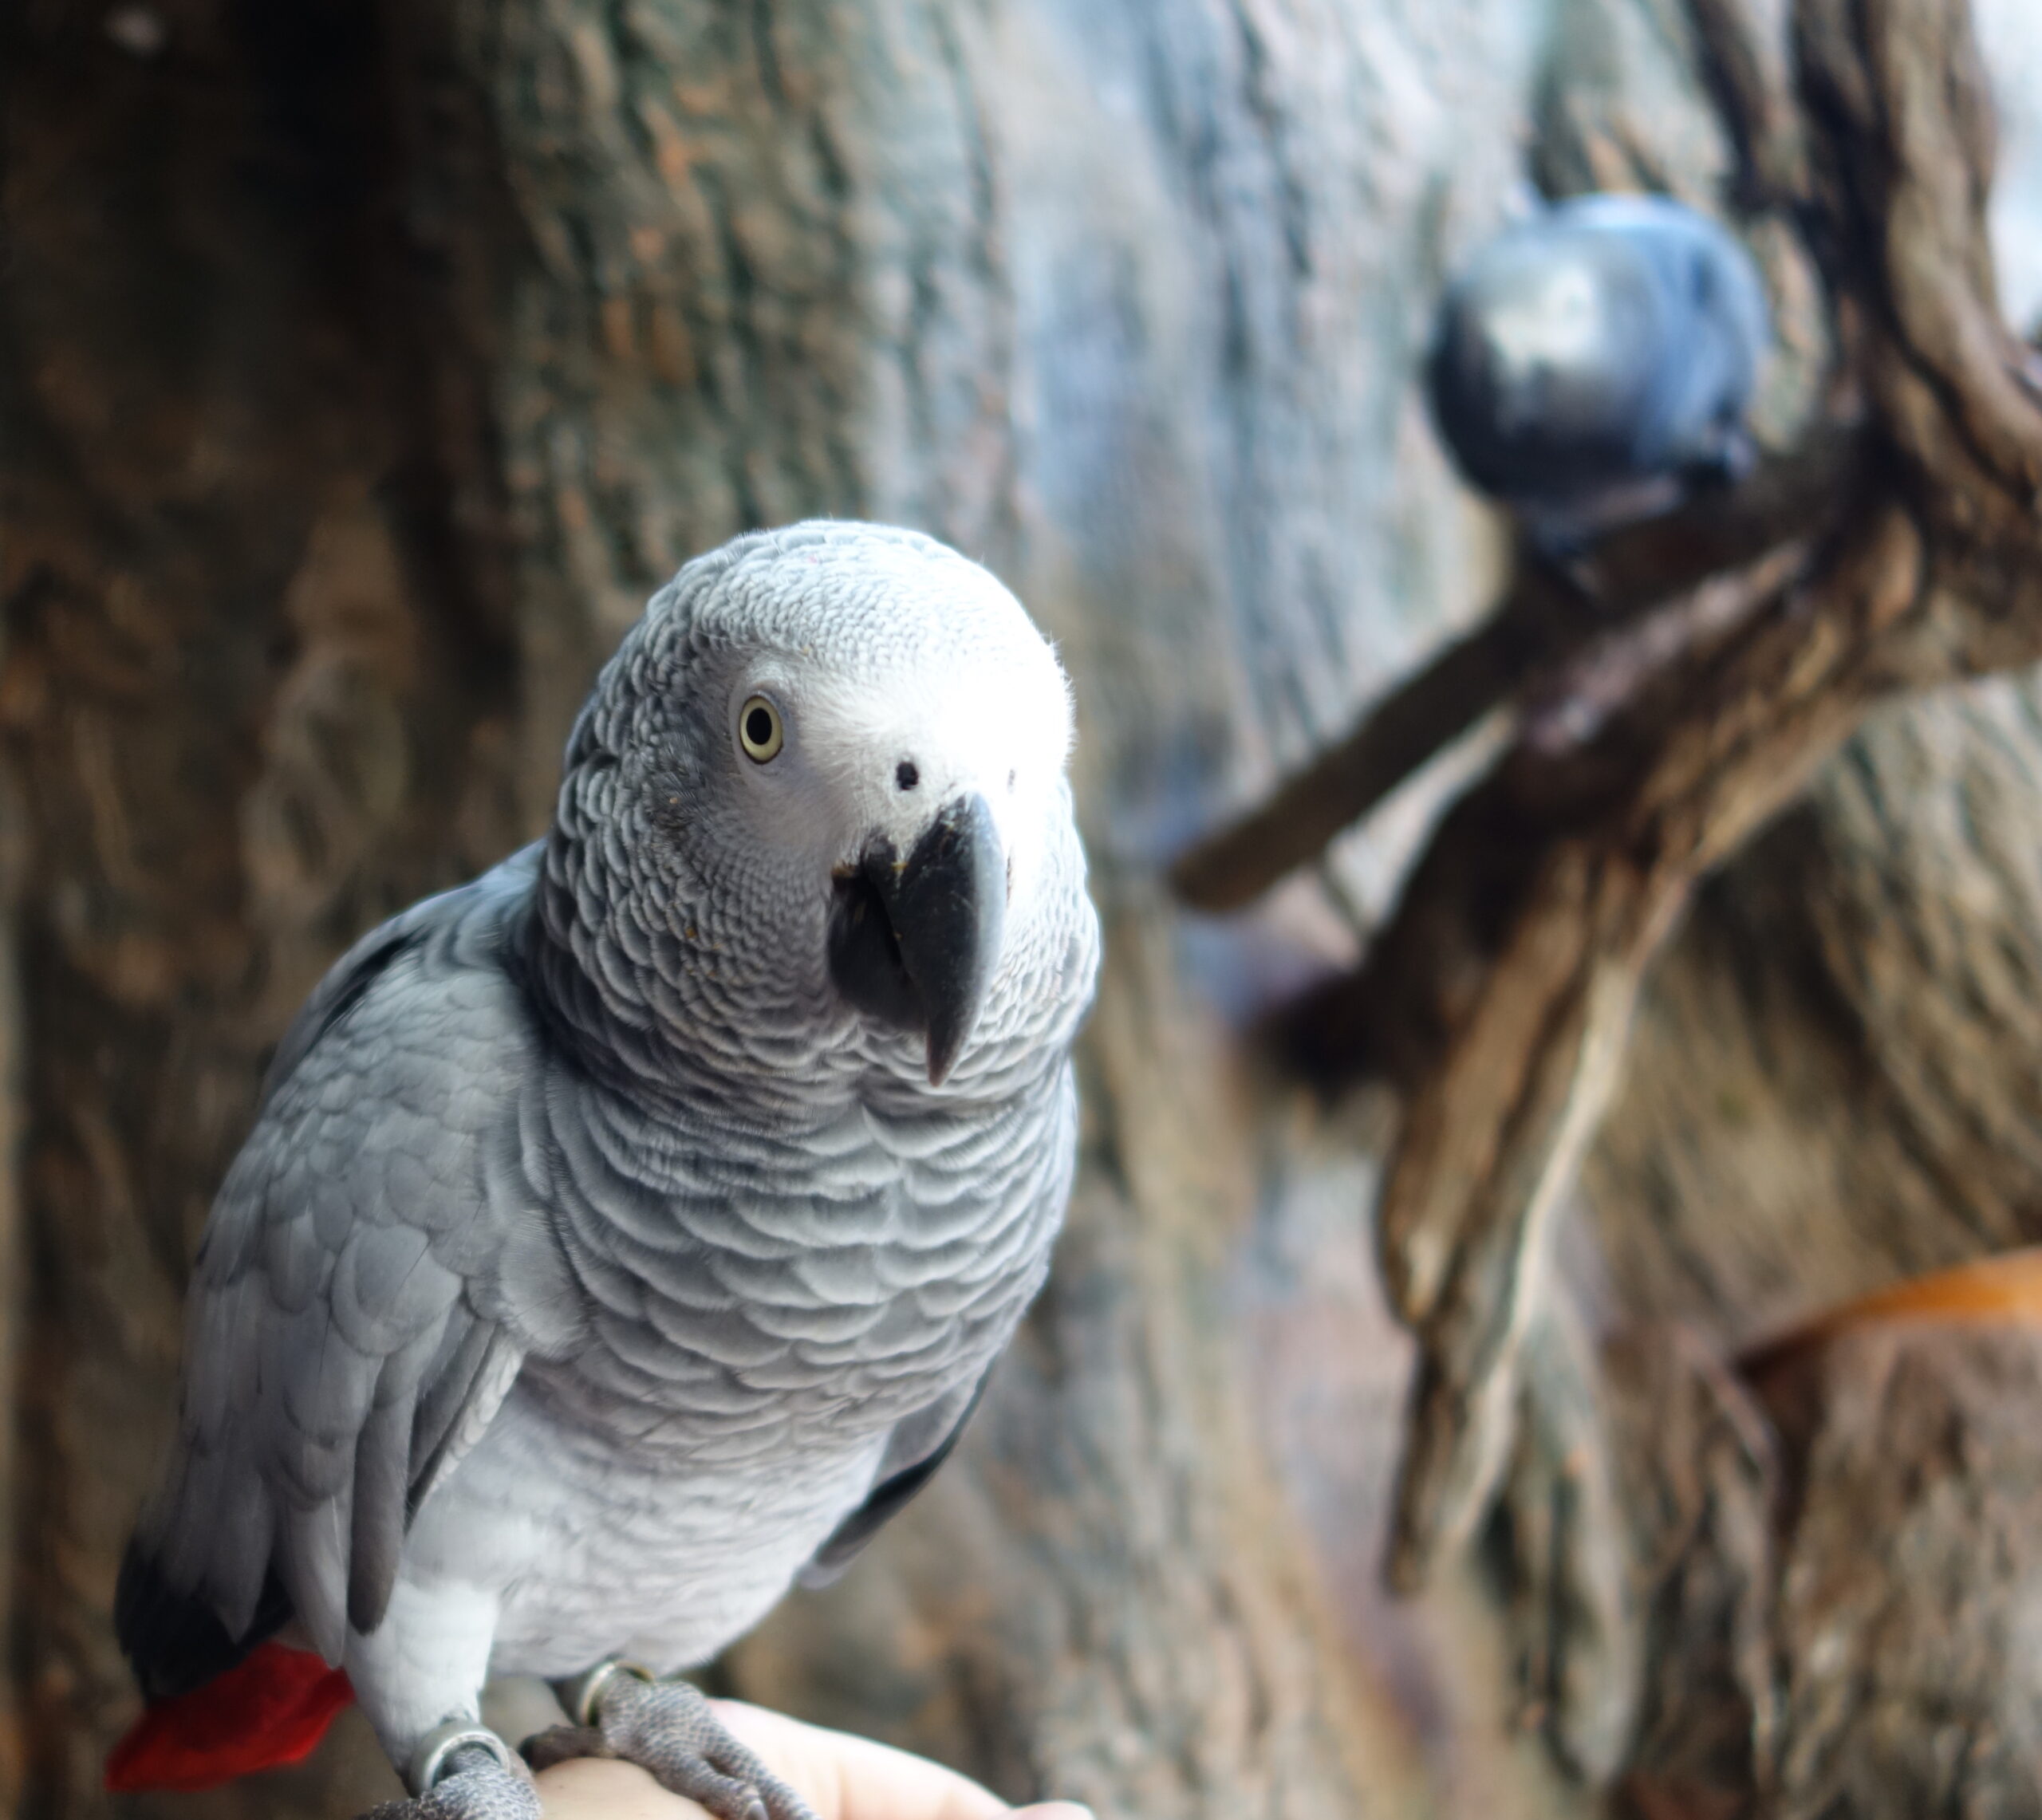 For some African grey parrots, sharing is caring